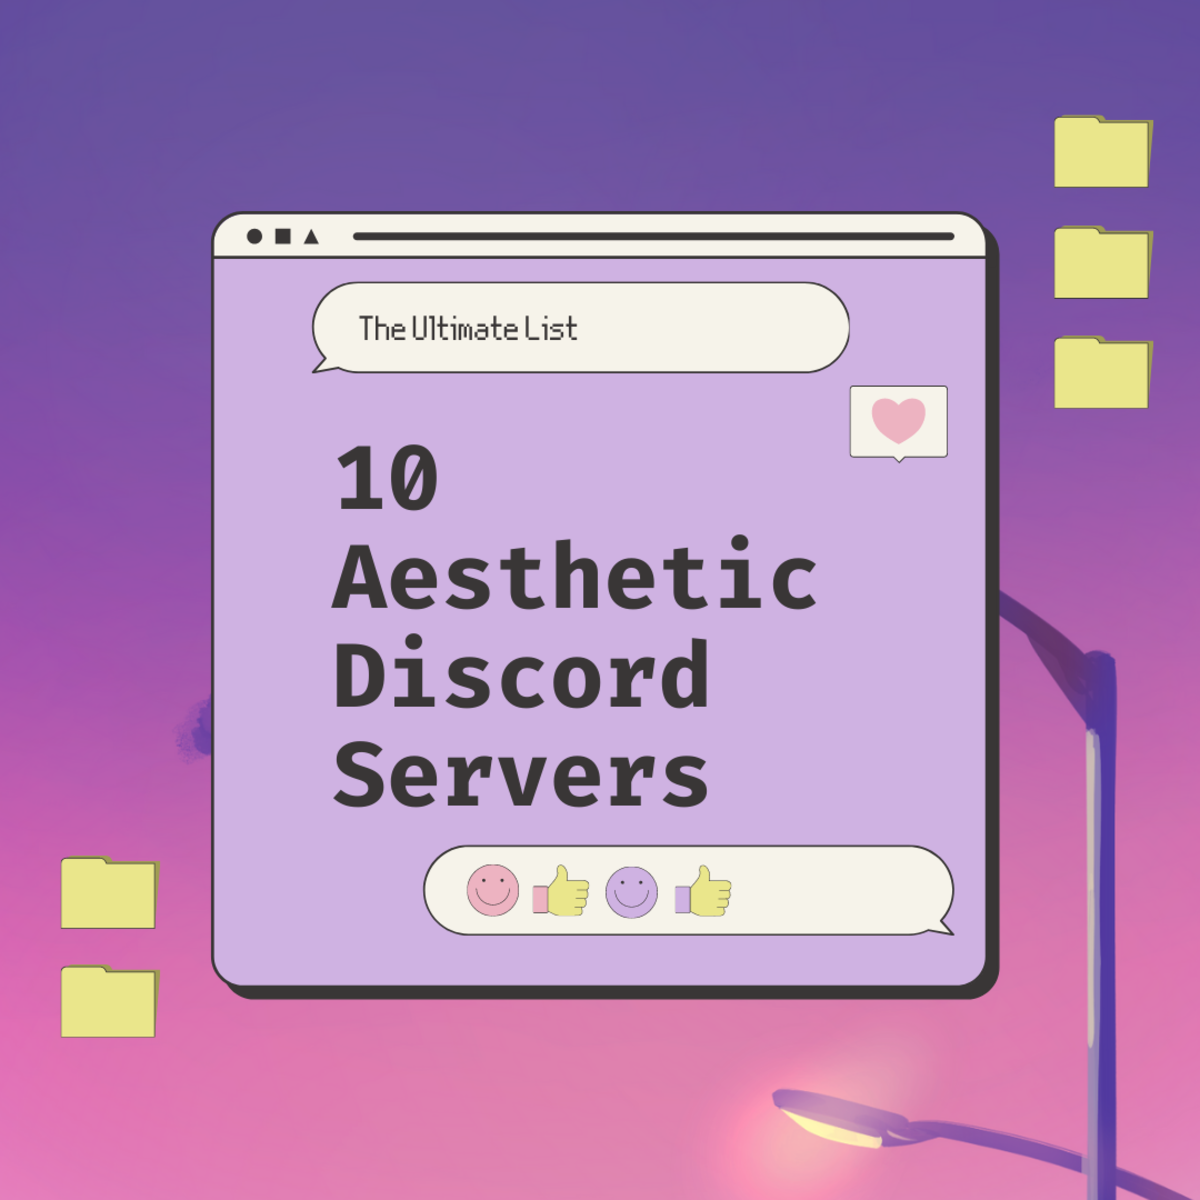 Discover 10 aesthetic Discord servers in this ultimate list!